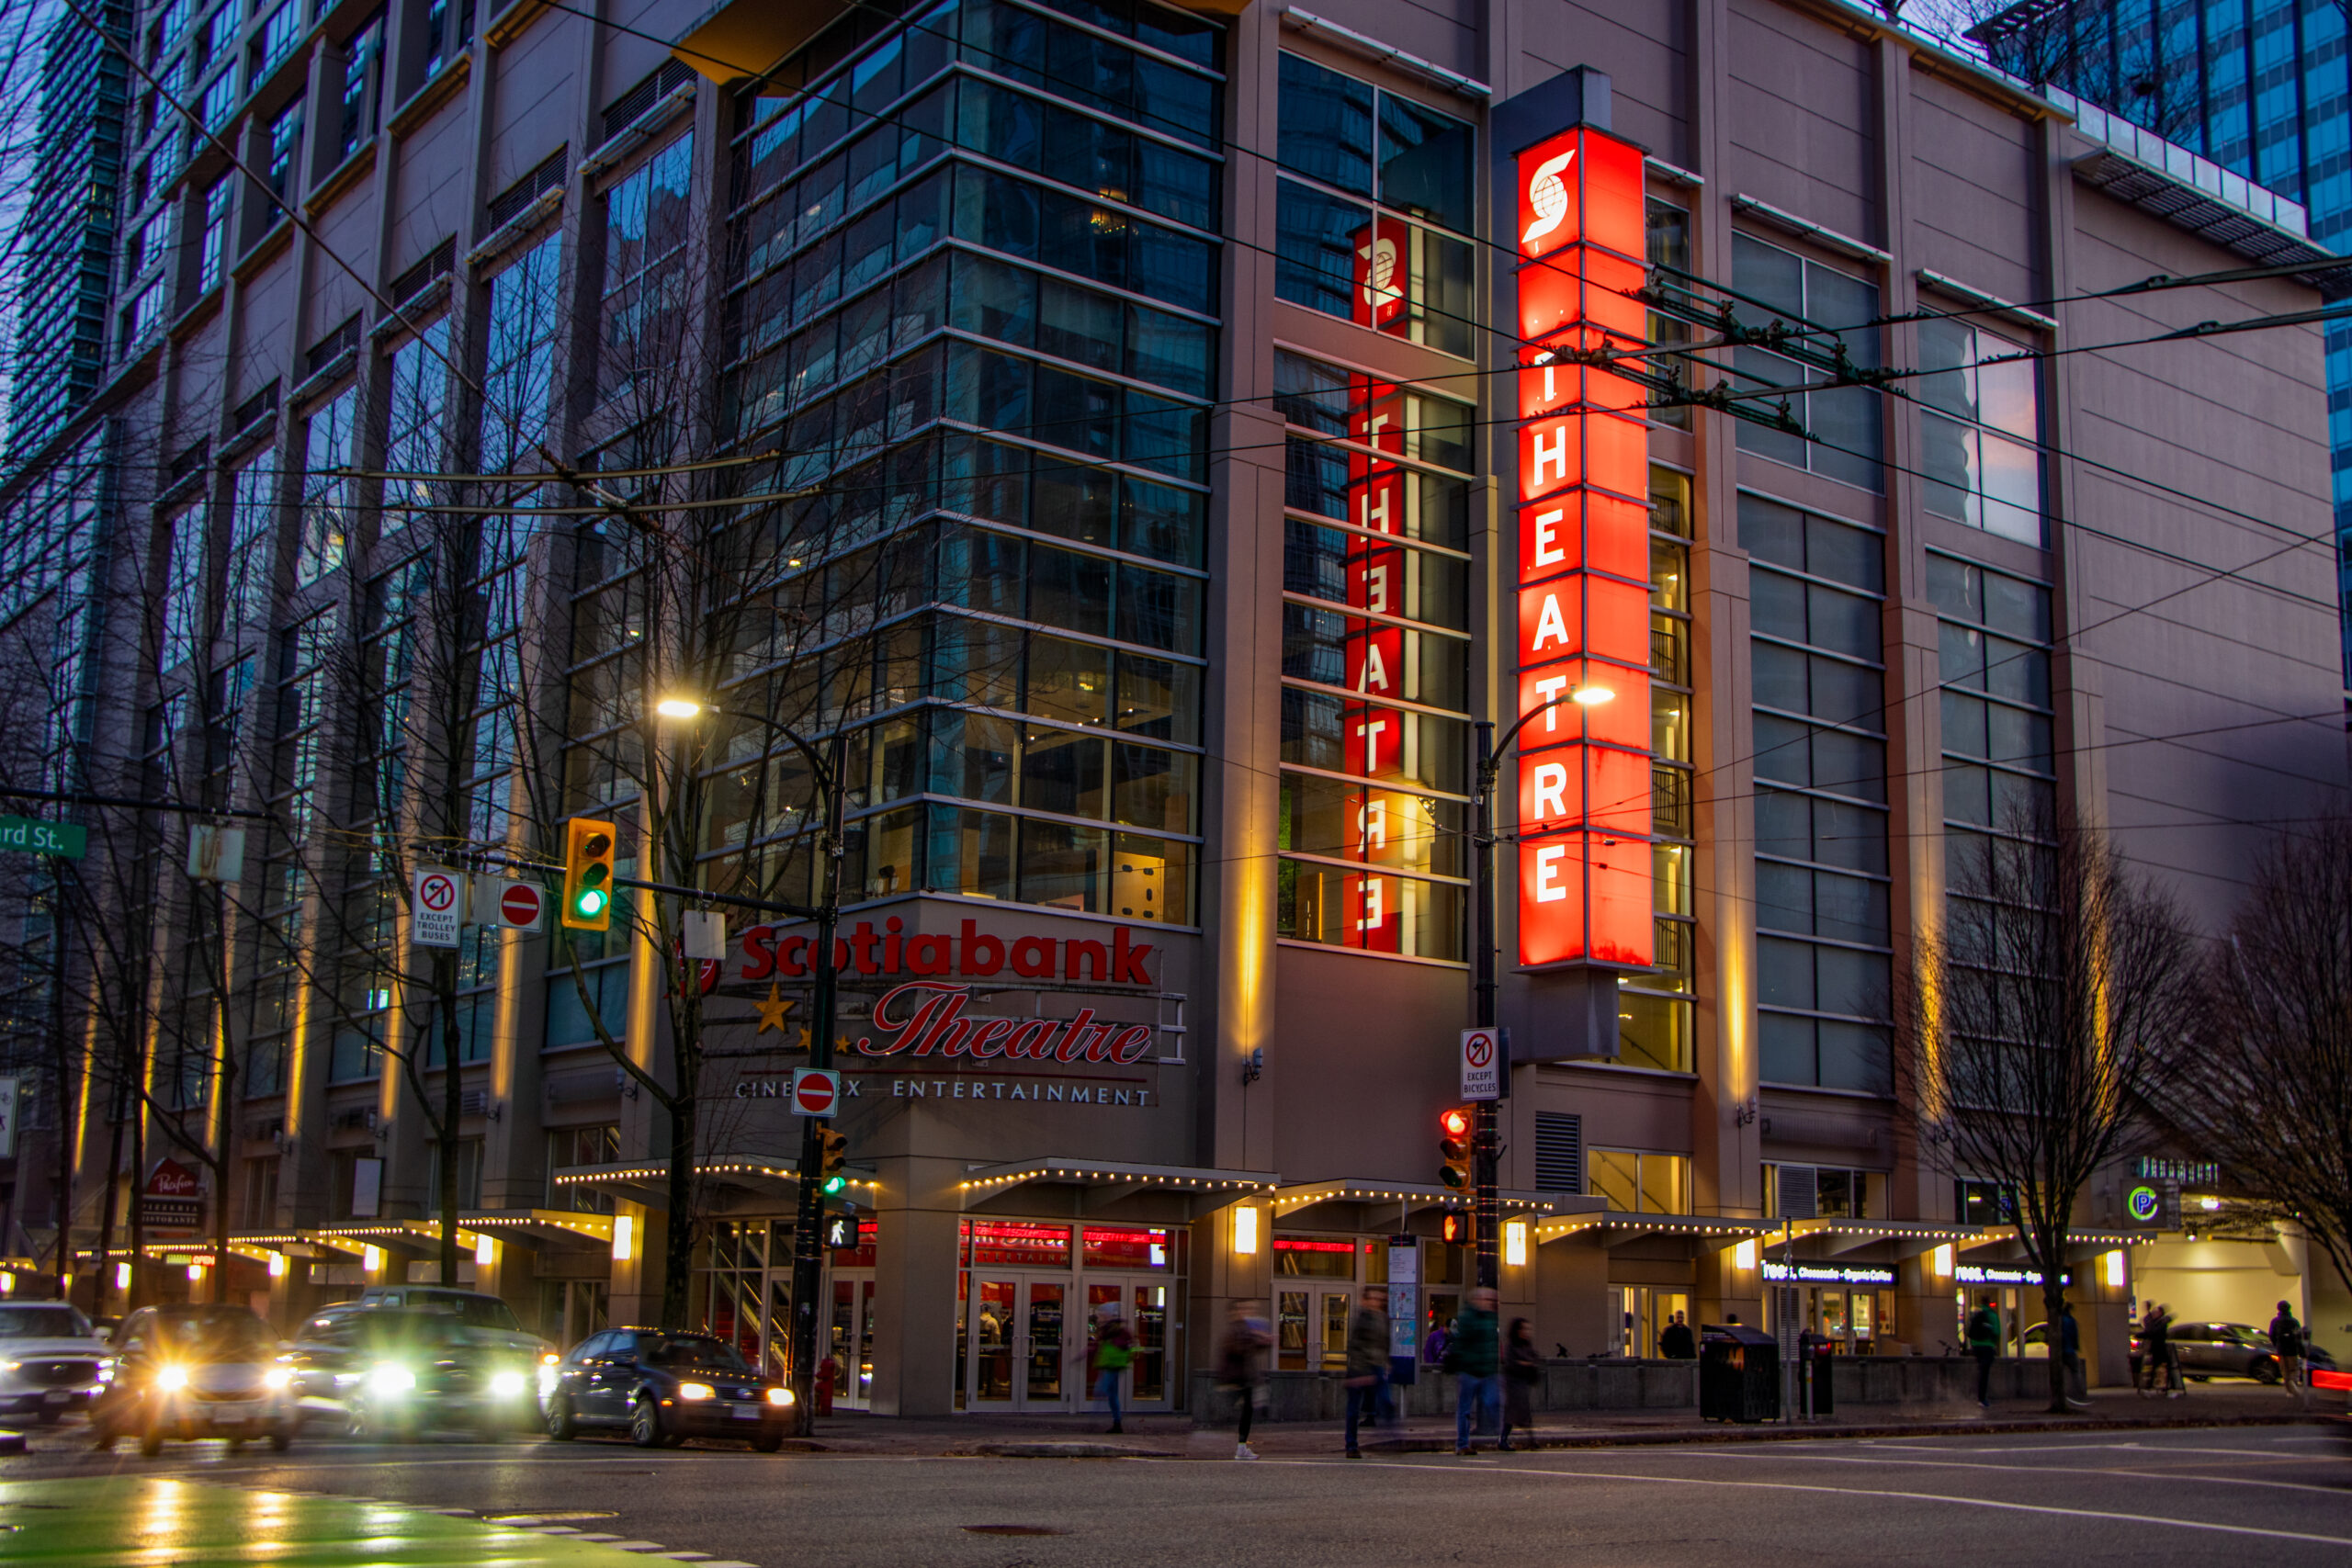 An outdoor sign of scotiabank theatre in front of a busy road on a dim evening.